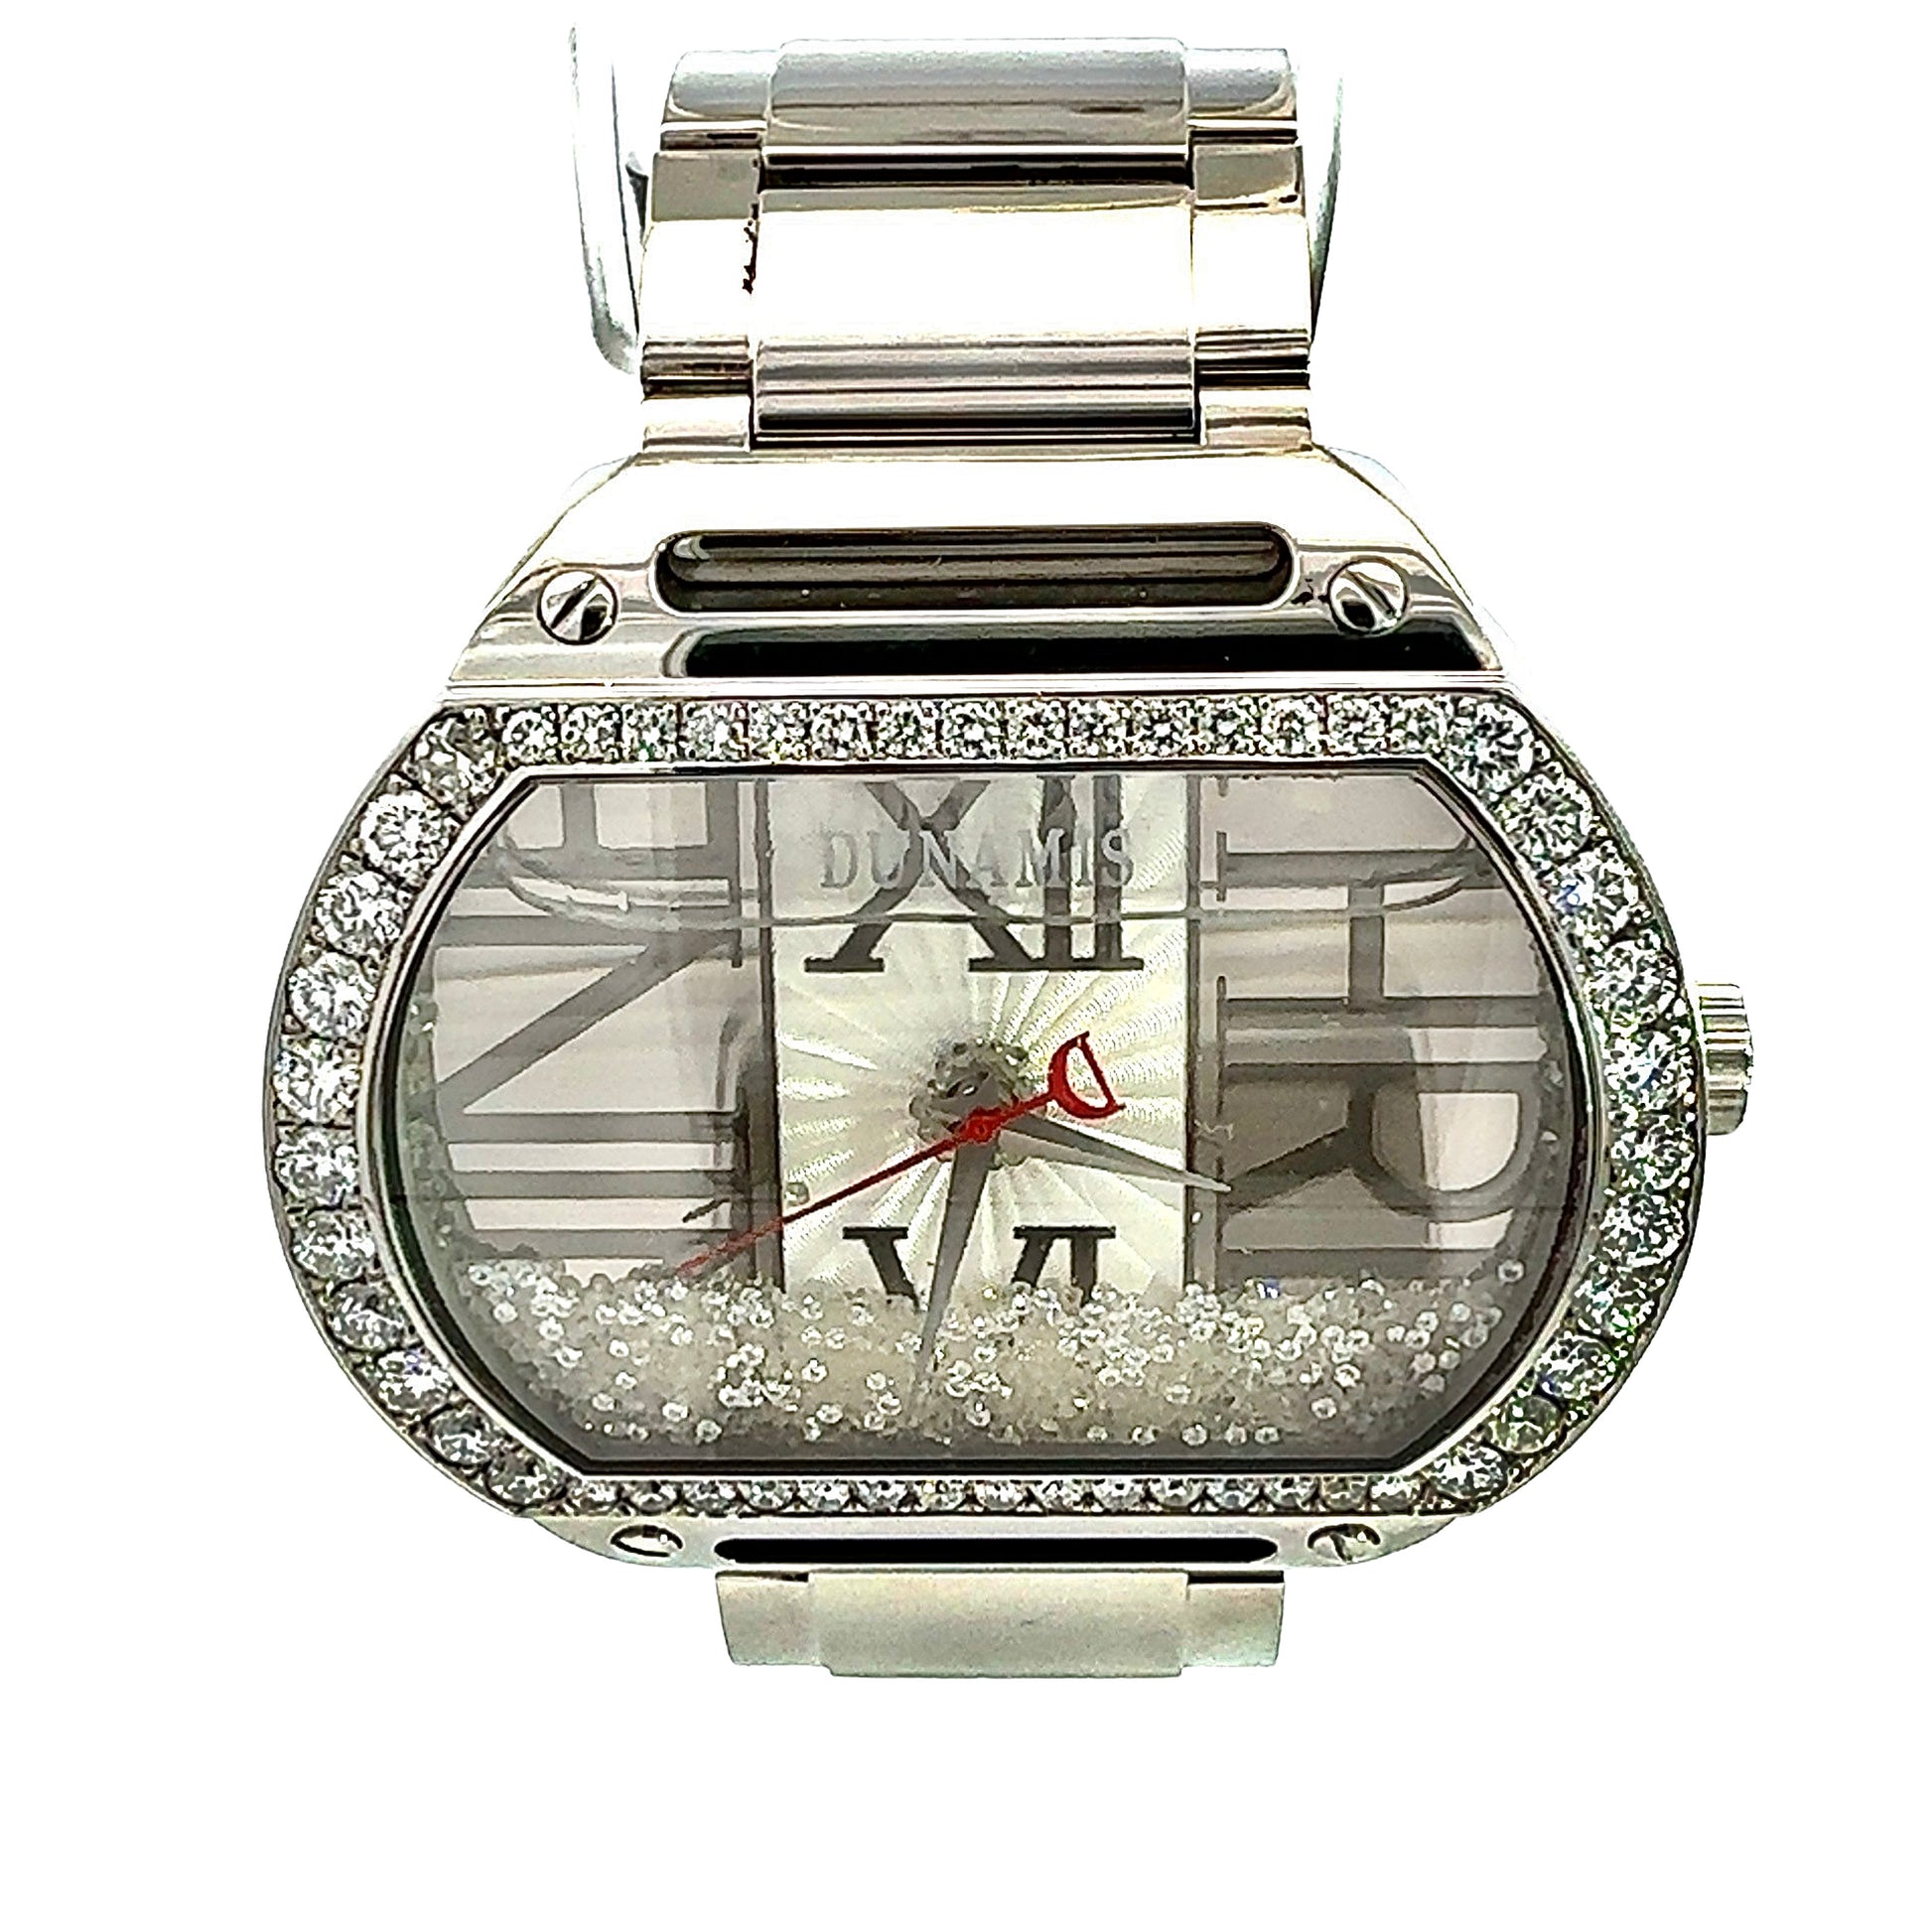 Dunamis Watch face with floating diamonds in liquid and diamonds around case